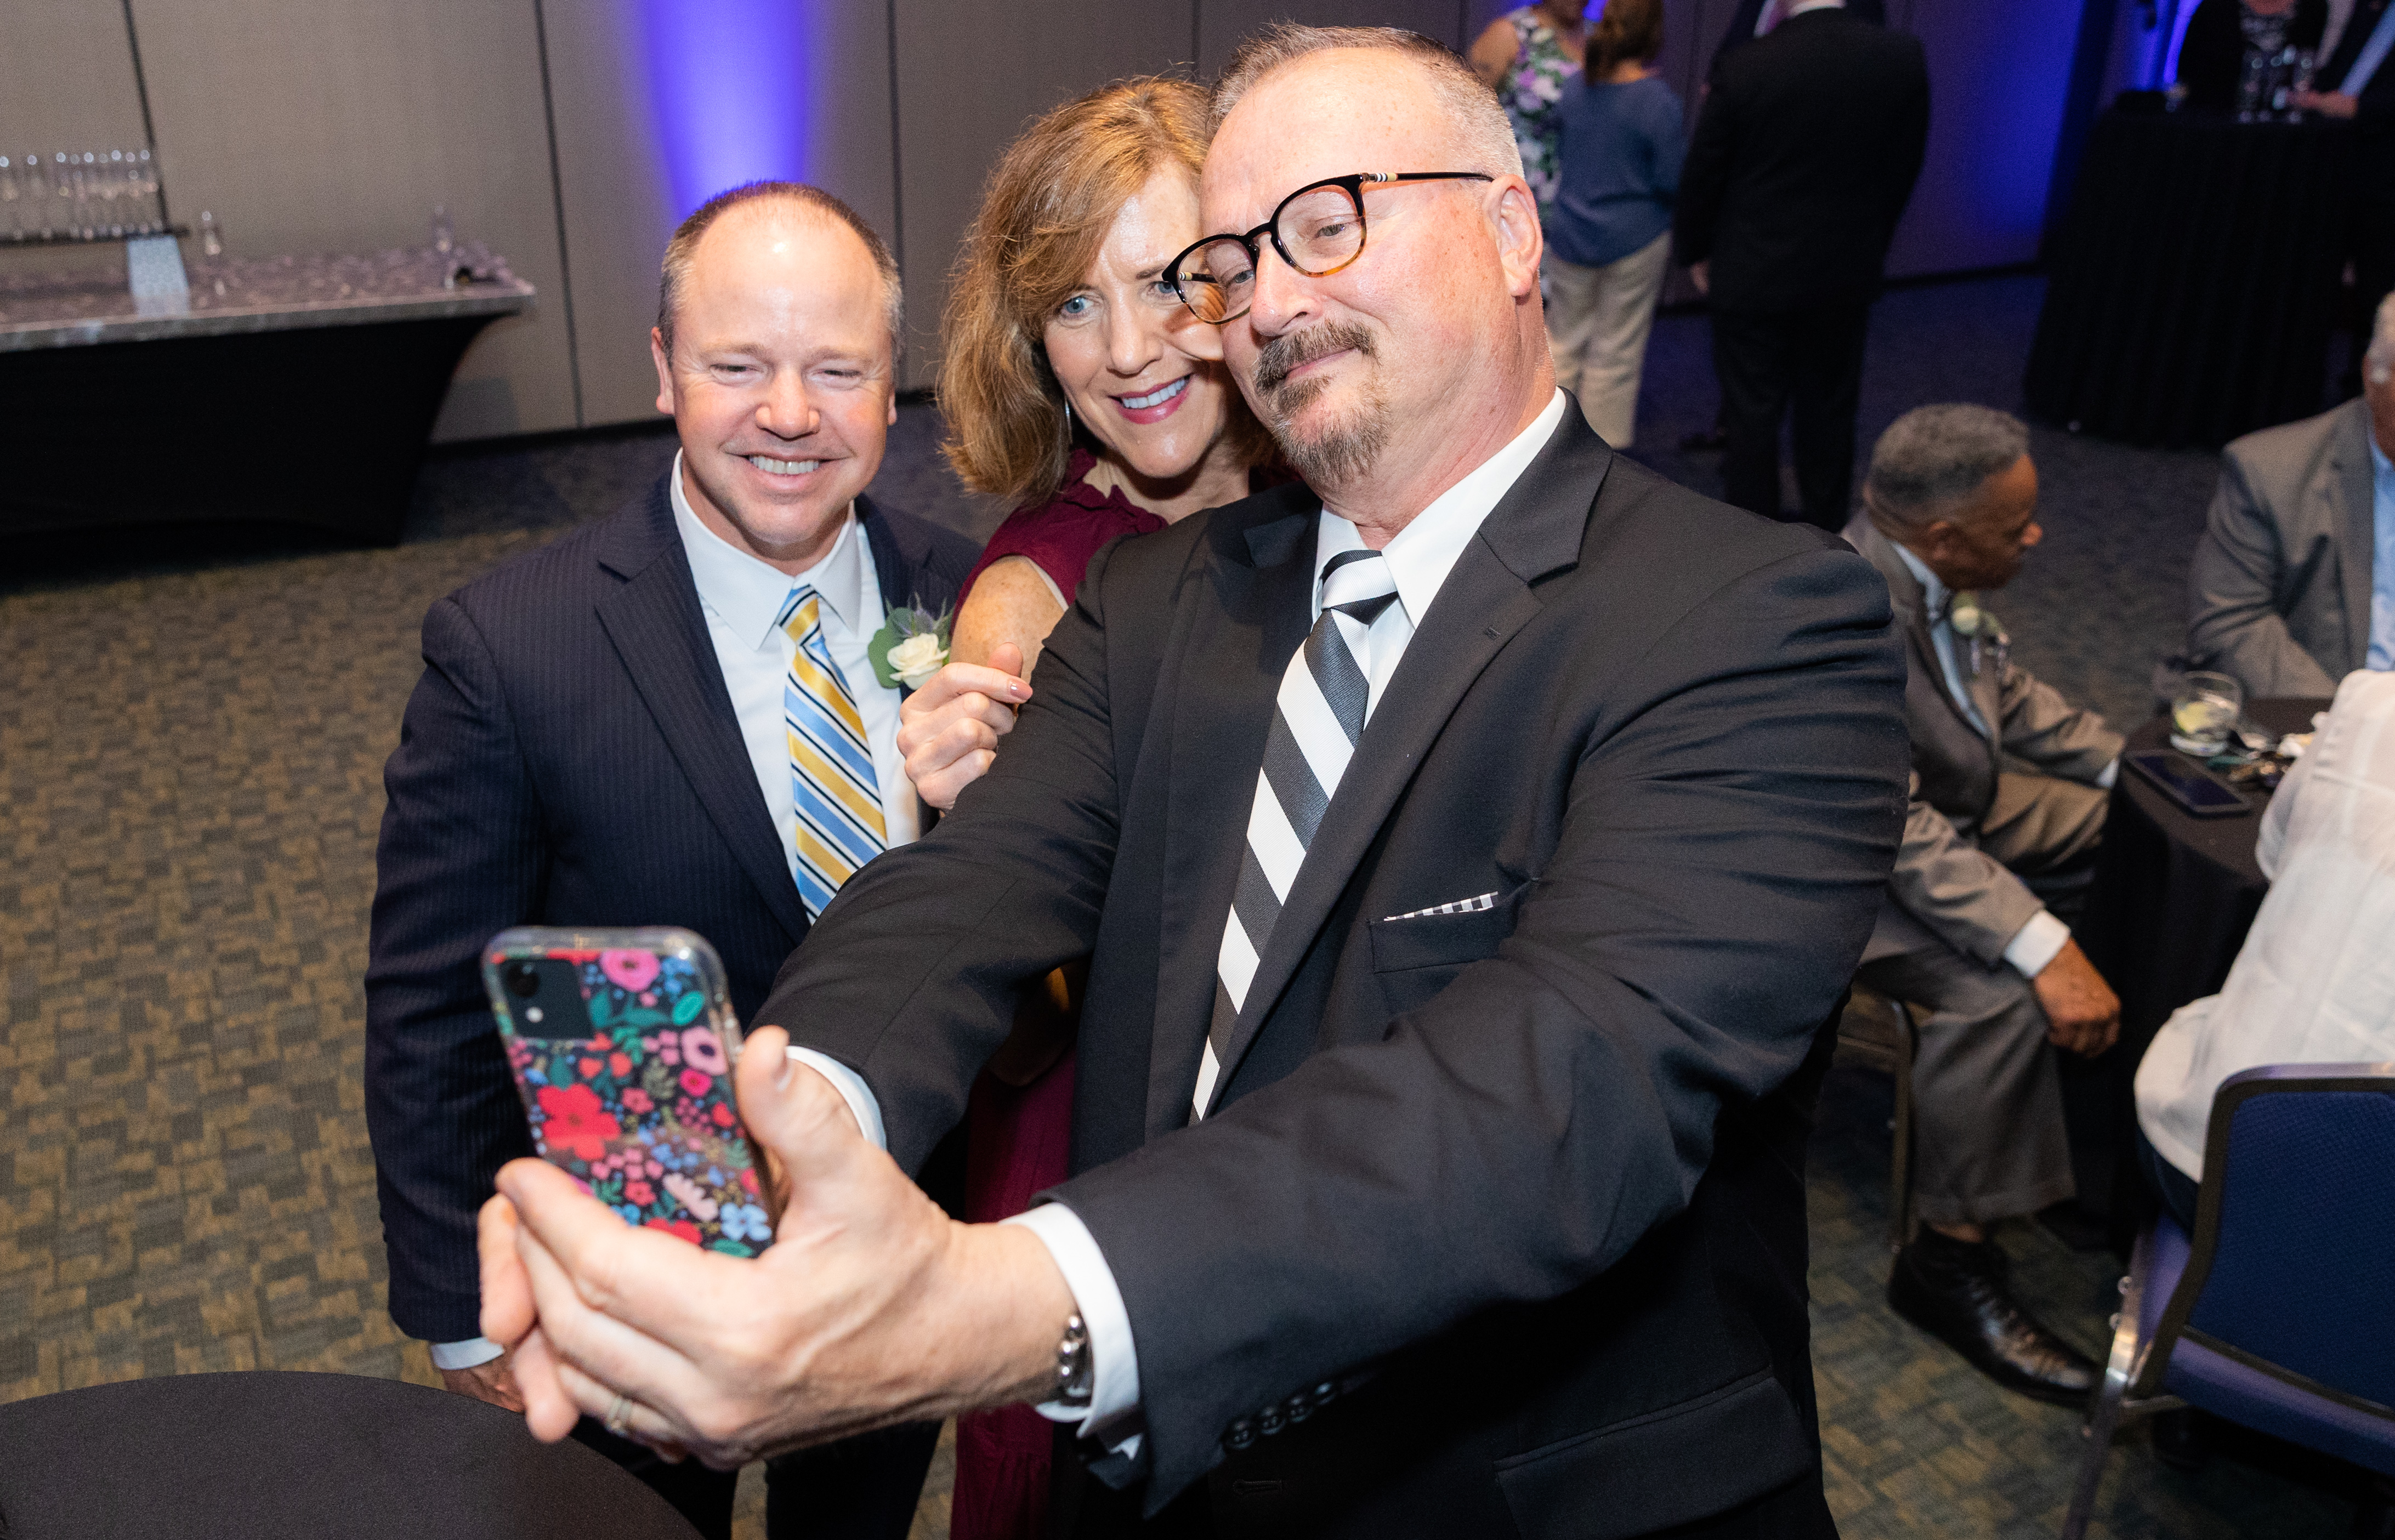 The Republican's advertising director Mark French, Greater Springfield Convention and Visitors Bureau's president Mary Kay Wydra, and Ed Pessolano, owner of Design & Advertising Associates, take a selfie together during the 25th annual Howdy Awards for Hospitality Excellence held at the MassMutual Center Monday evening, May 16, 2022. (Hoang ‘Leon’ Nguyen / The Republican)